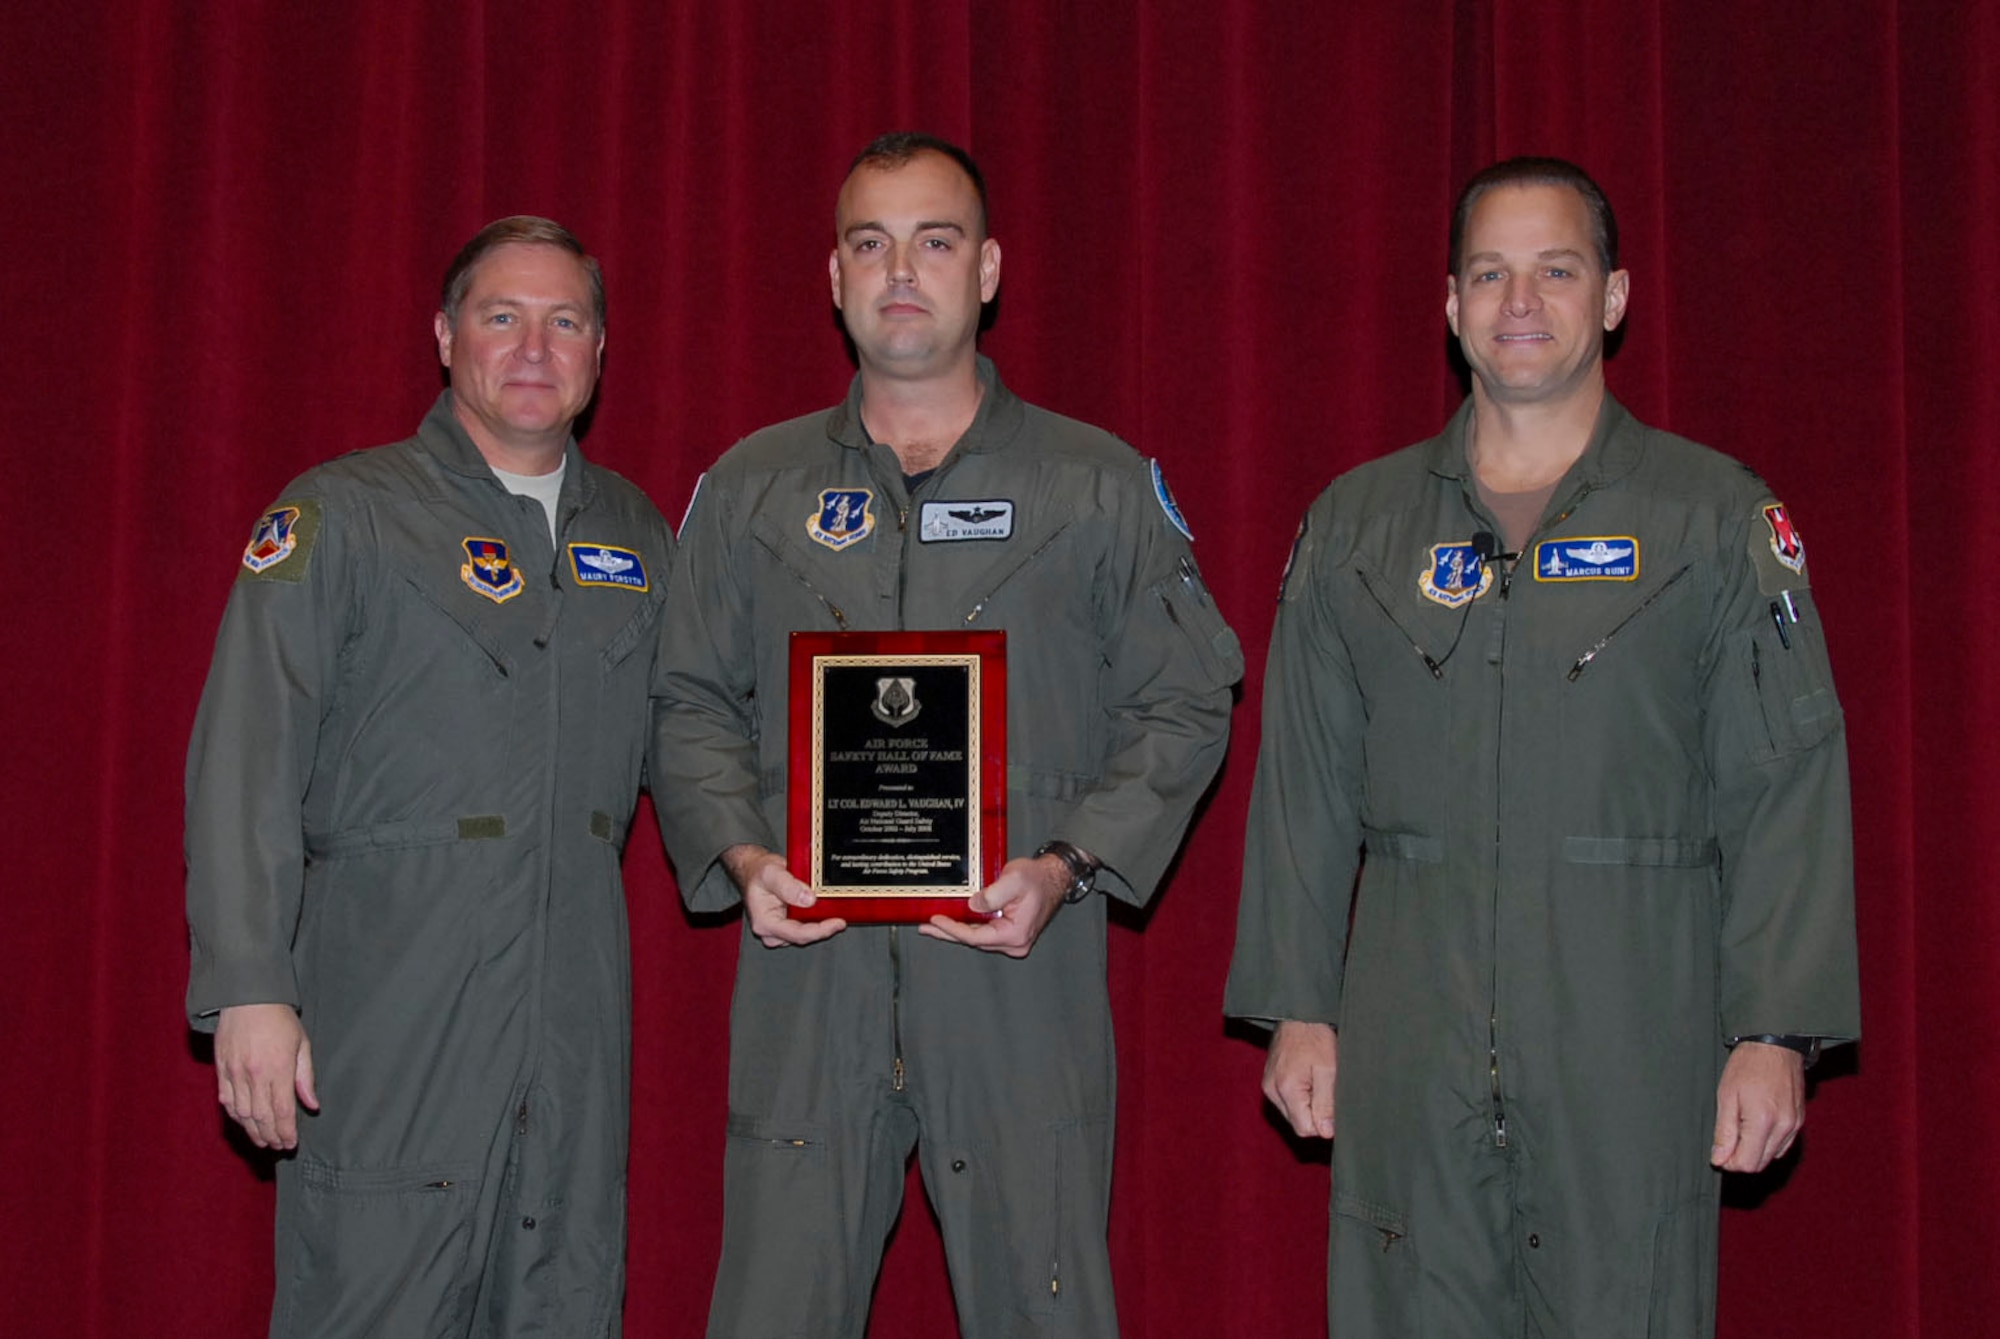 Lt. Col. Ed Vaughan (center) is inducted into the Air Force Safety Hall of Fame in a ceremony Feb. 6.  With him are (left) Maj. Gen. Maury Forsyth, commander of the Spaatz Center at Maxwell Air Force Base, Ala., and Col.
Marcus Quint, chief of the Air National Guard Safety Directorate. (Air Force photo by Jamie Pitcher)
